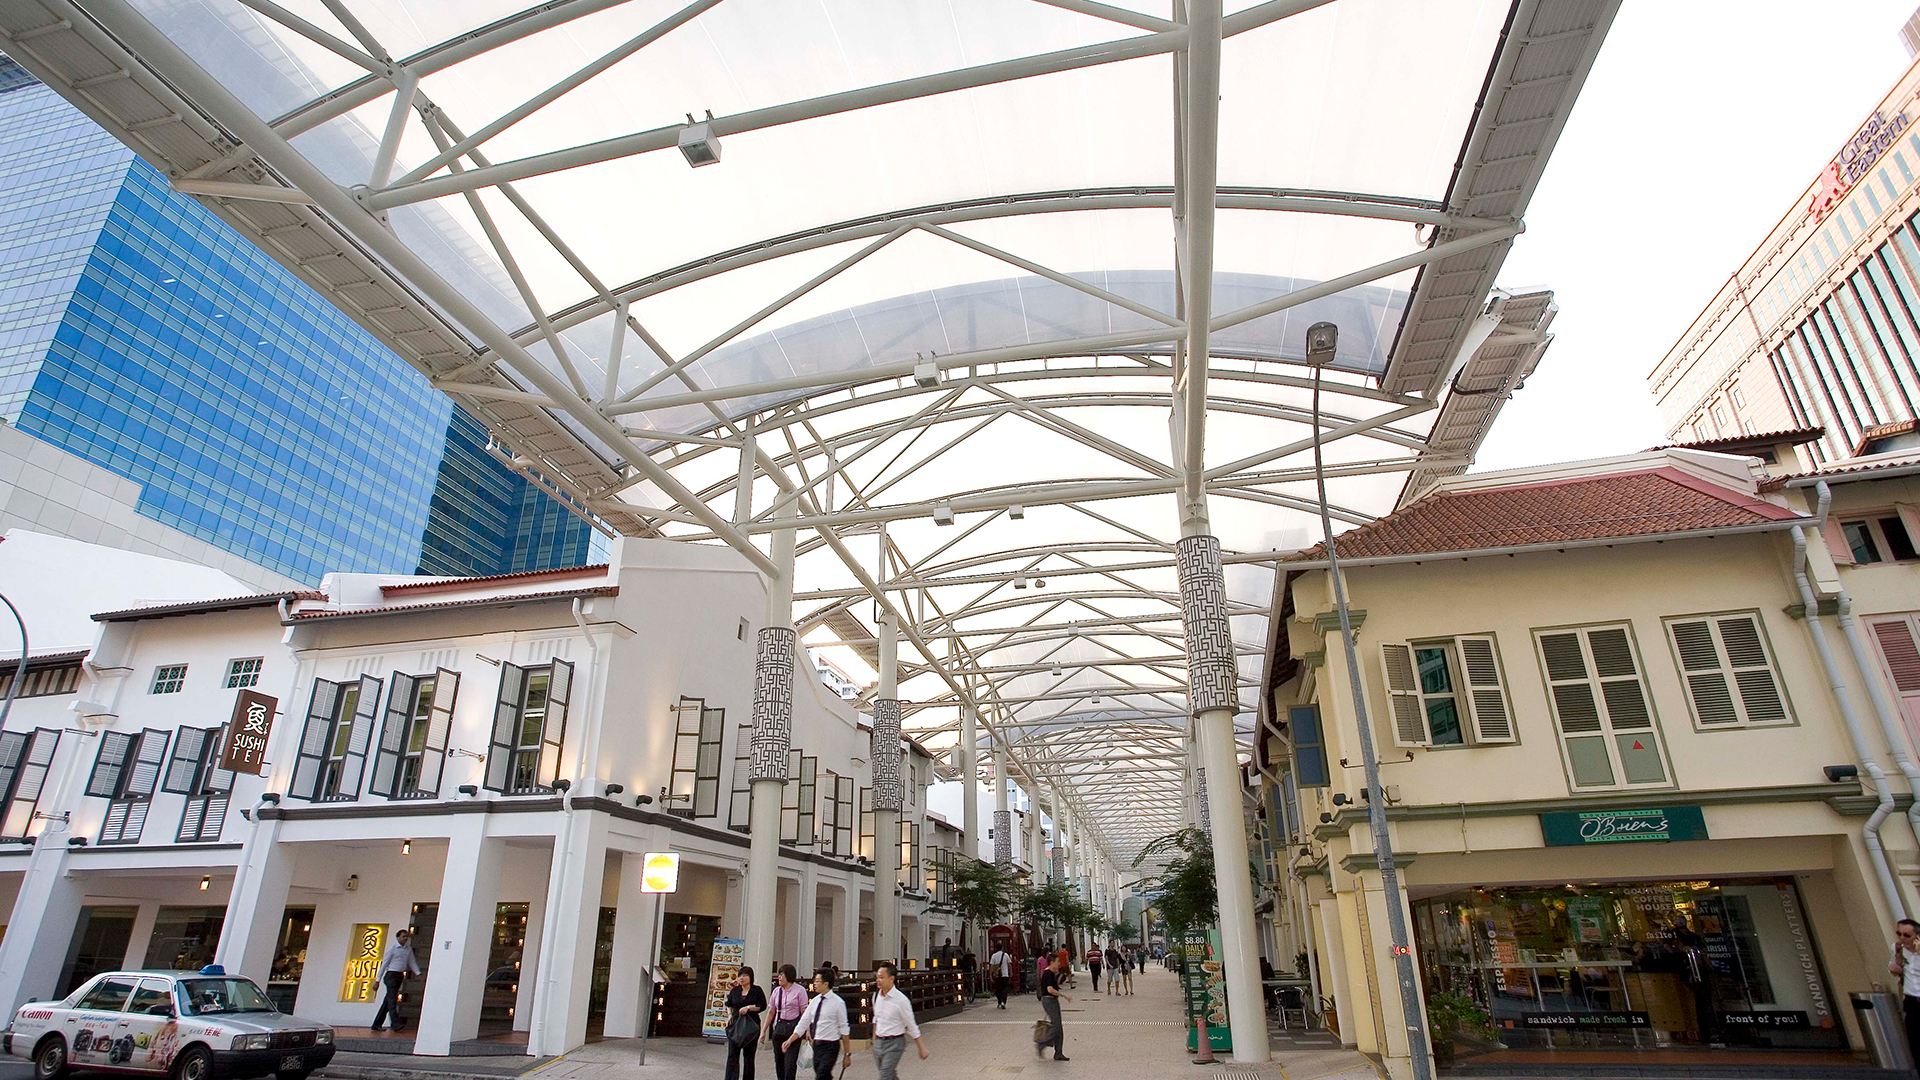 The Texlon® ETFE roof provides plenty natural lighting, fresh air circulation and protection from any undesired weather.